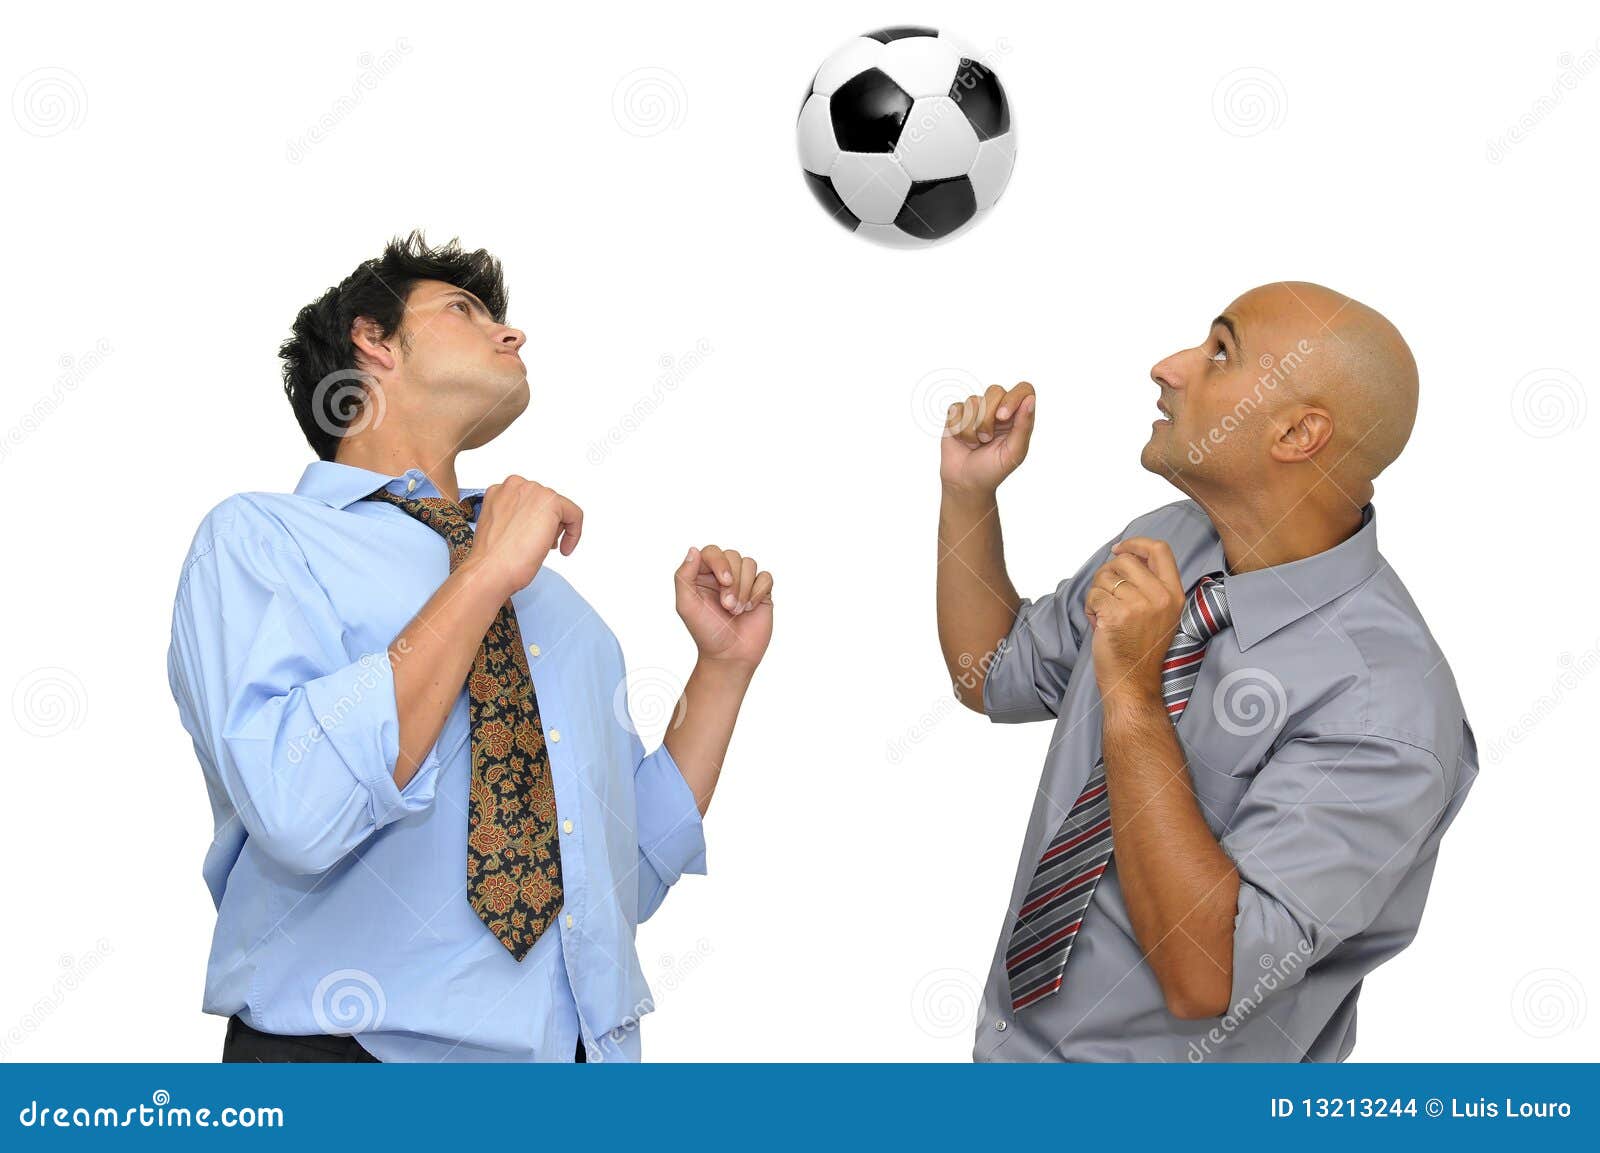 I love football stock photo. Image of header, game, player - 13213244